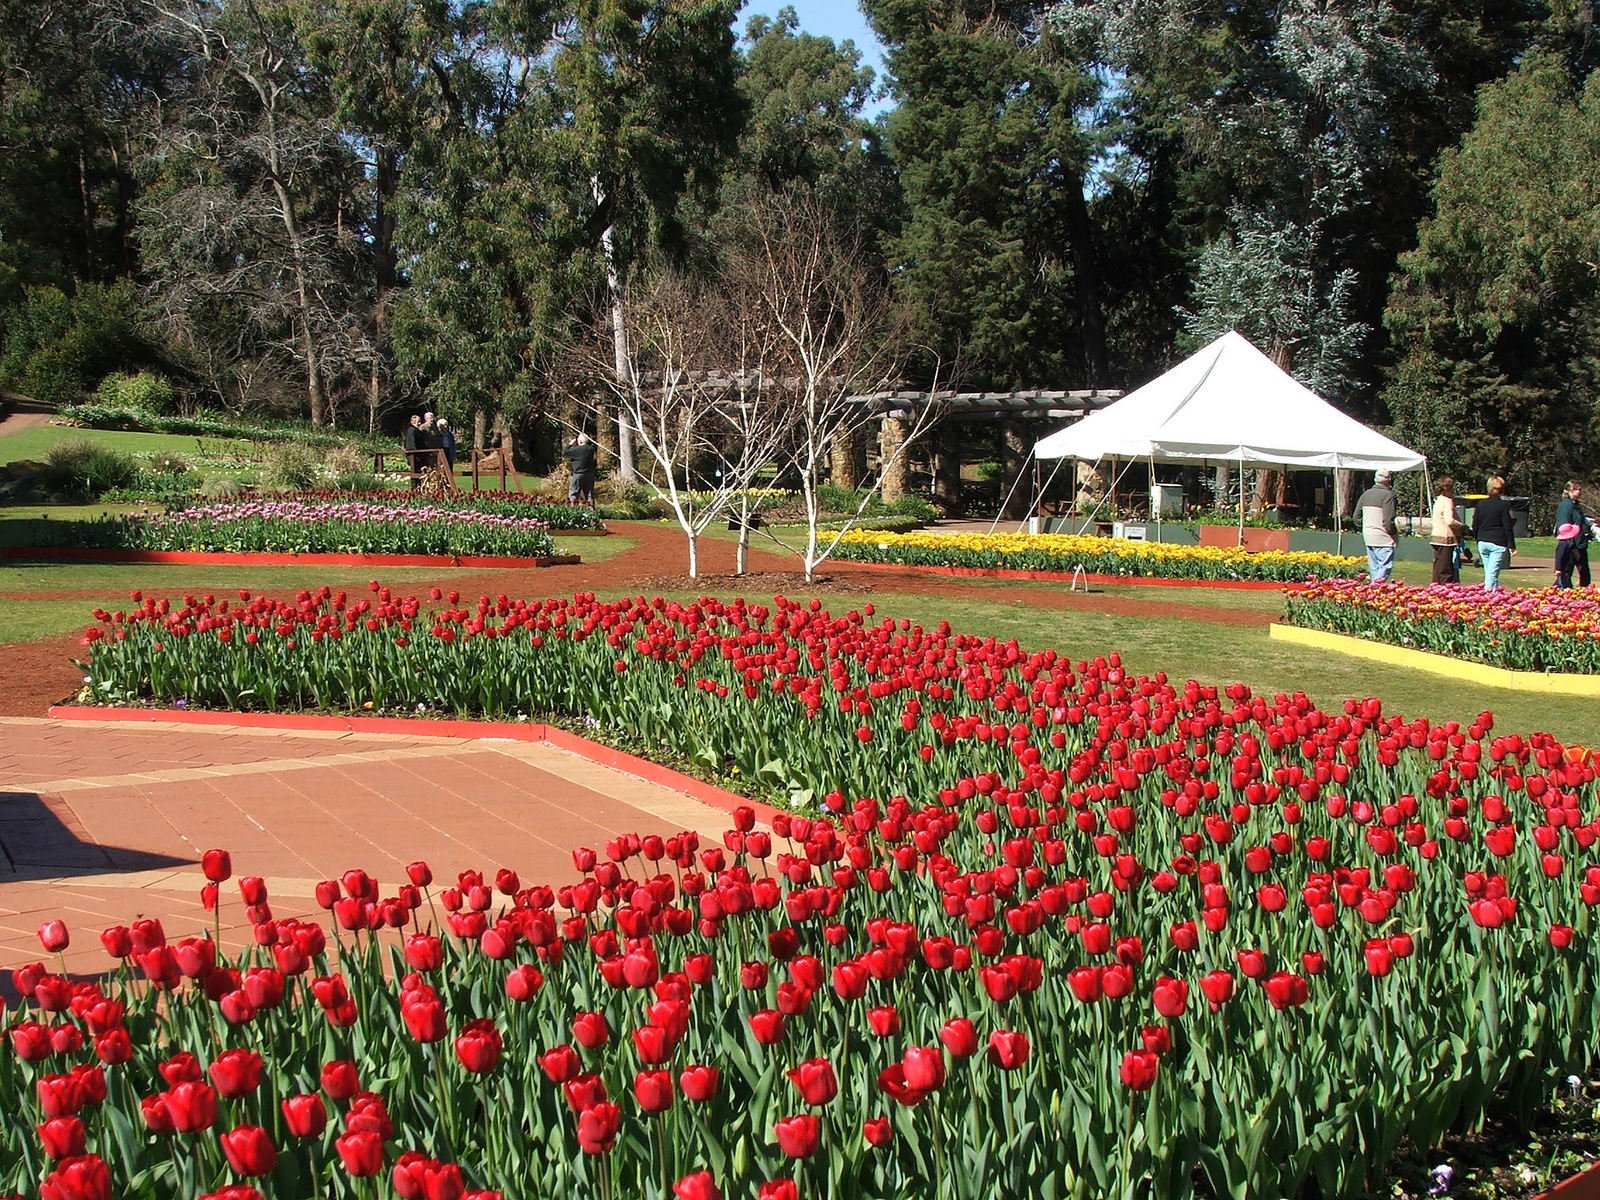 people on an open area with many red flowers